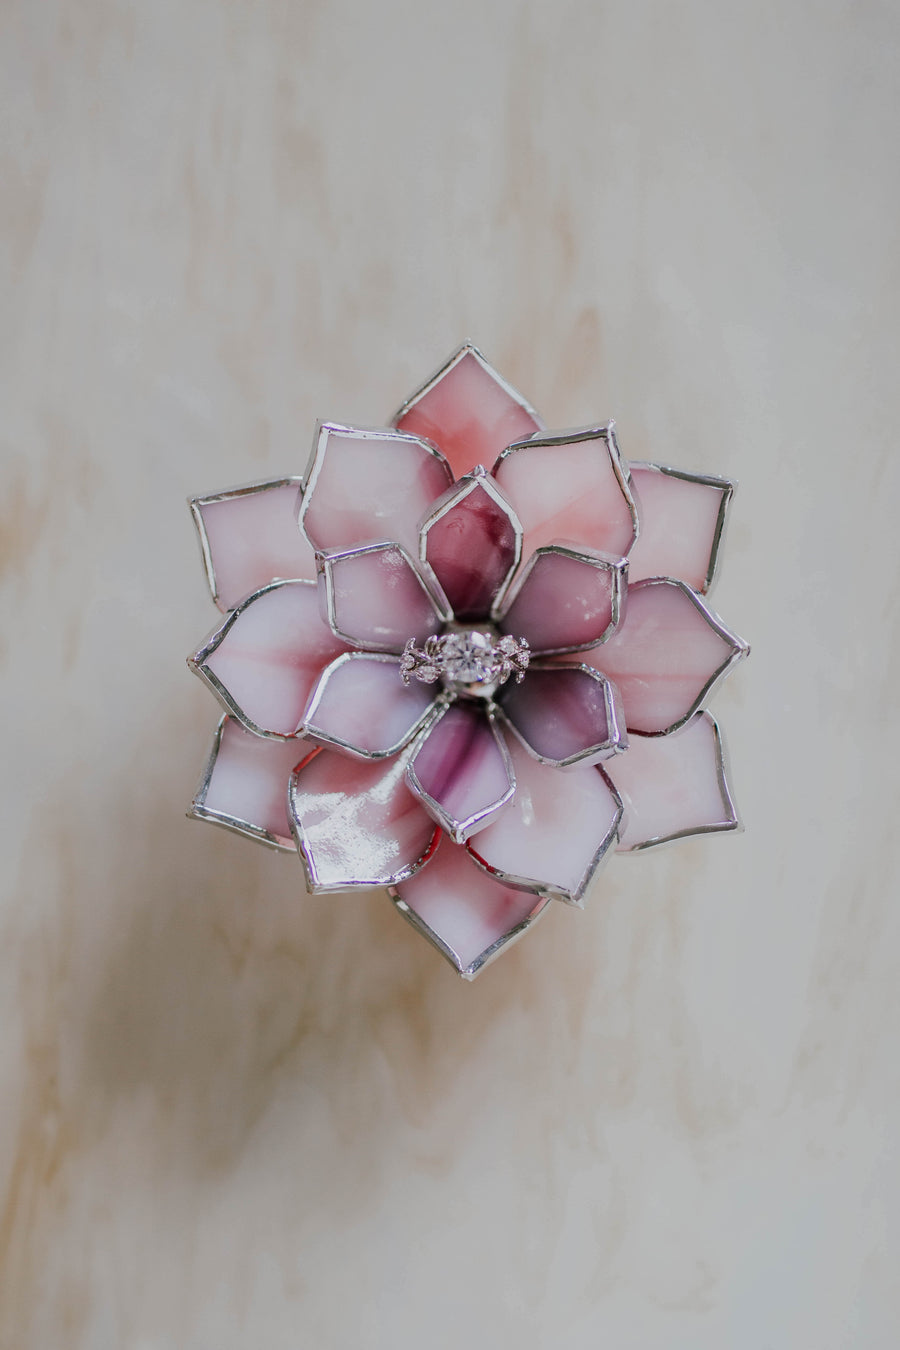 stained-glass-pink-magnolia-ring-dish-by-waen (1)